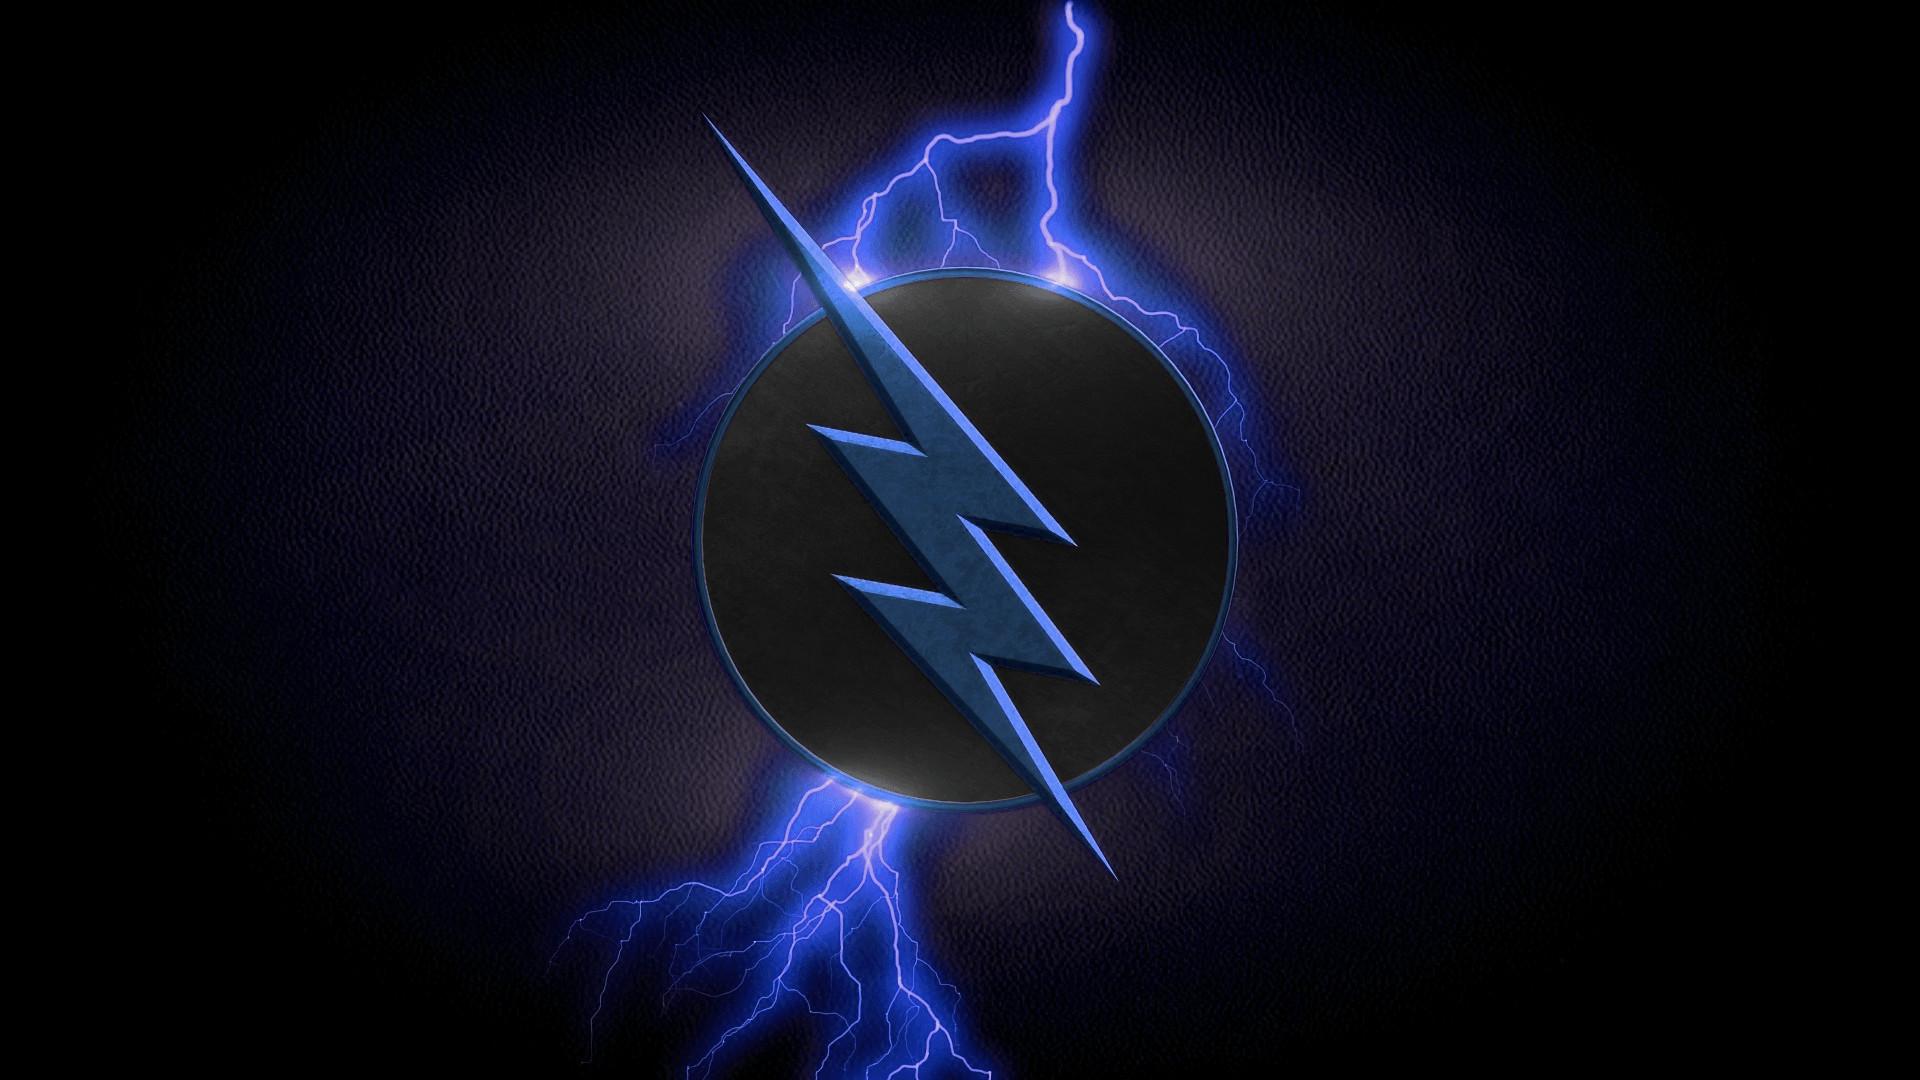 Zoom The Flash Wallpaper background picture